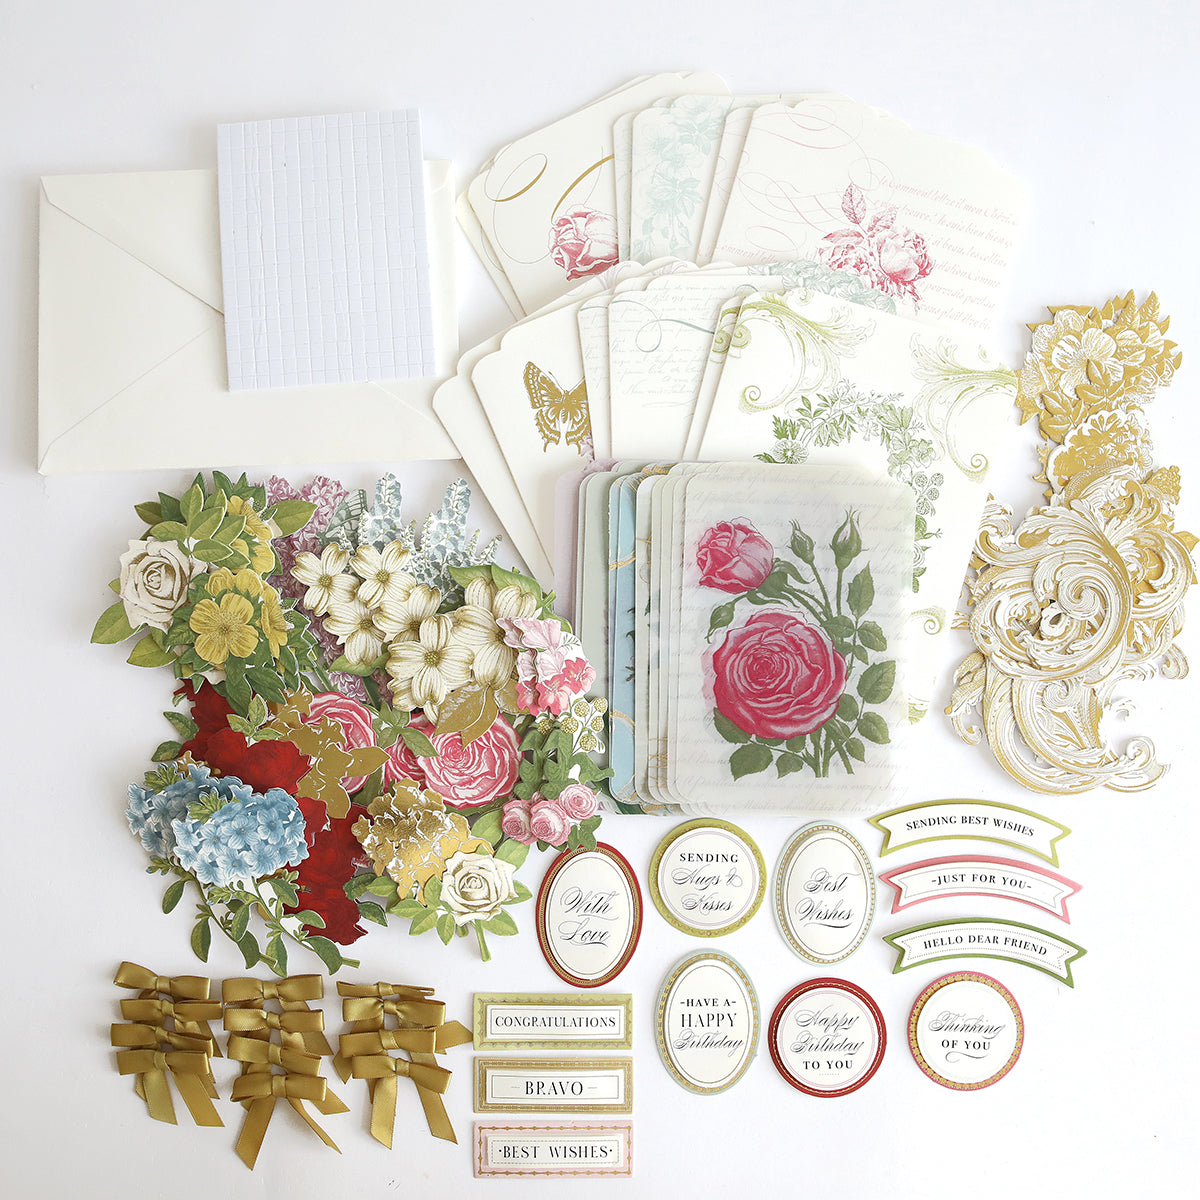 An assortment of Simply Perfect Patterns Card Making Kit including floral stickers, gold accents, decorative tags, and patterned paper on a white background.